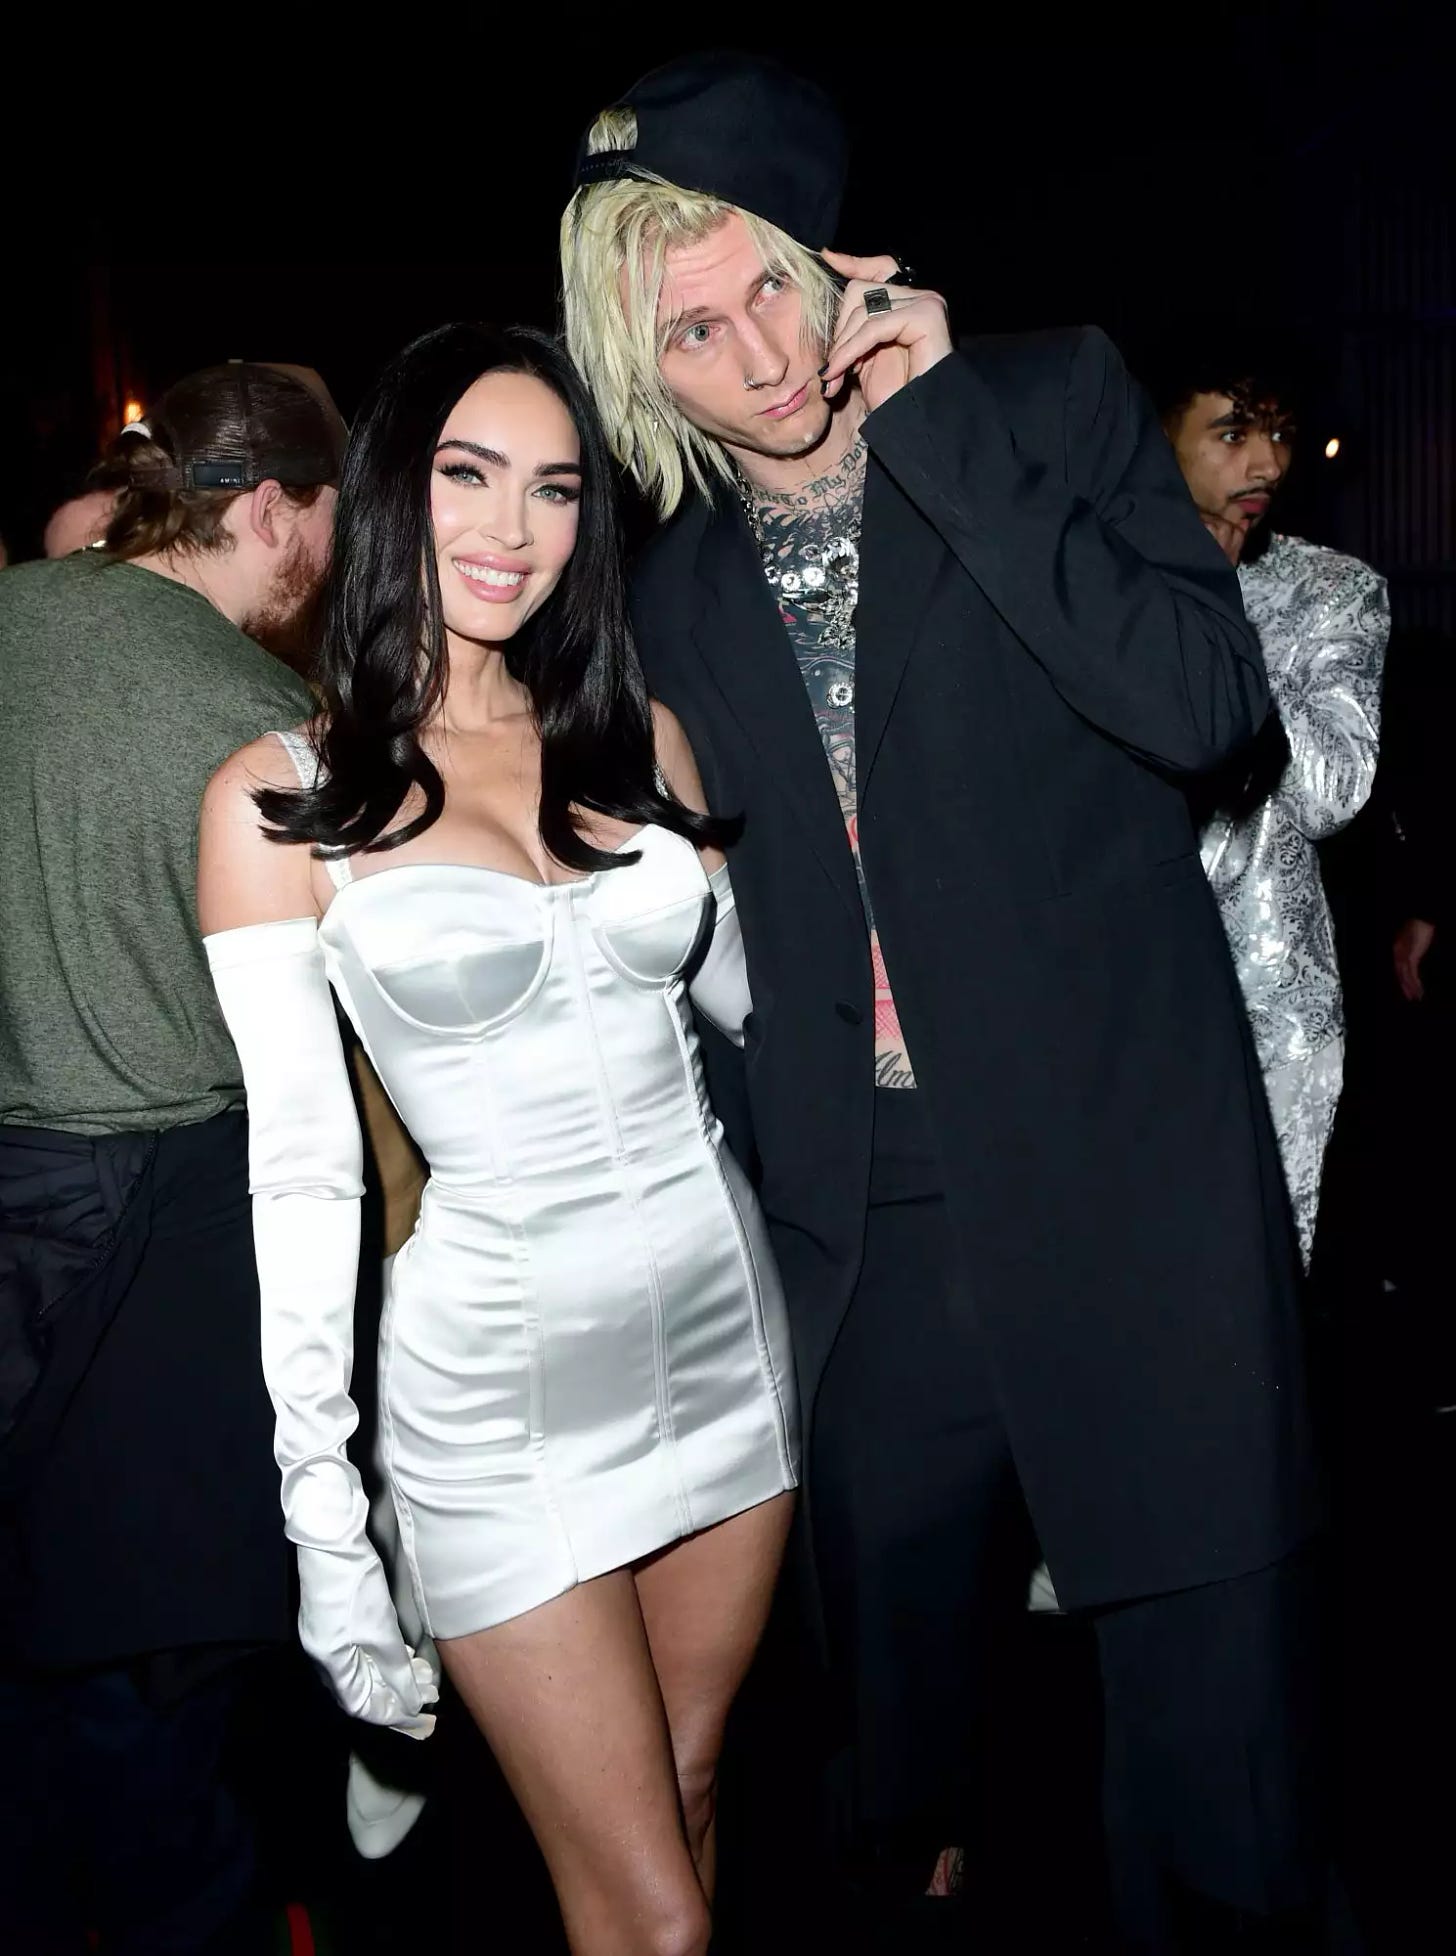 LOS ANGELES, CALIFORNIA - FEBRUARY 05: (L-R) Megan Fox and Machine Gun Kelly attend Universal Music Group’s 2023 After Party to celebrate the 65th Grammy Awards, Presented by Coke Studio and Merz Aesthetics’ Xperience+ at Milk Studios Los Angeles on February 05, 2023 in Los Angeles, California. (Photo by Vivien Killilea/Getty Images for Universal Music Group for Brands)